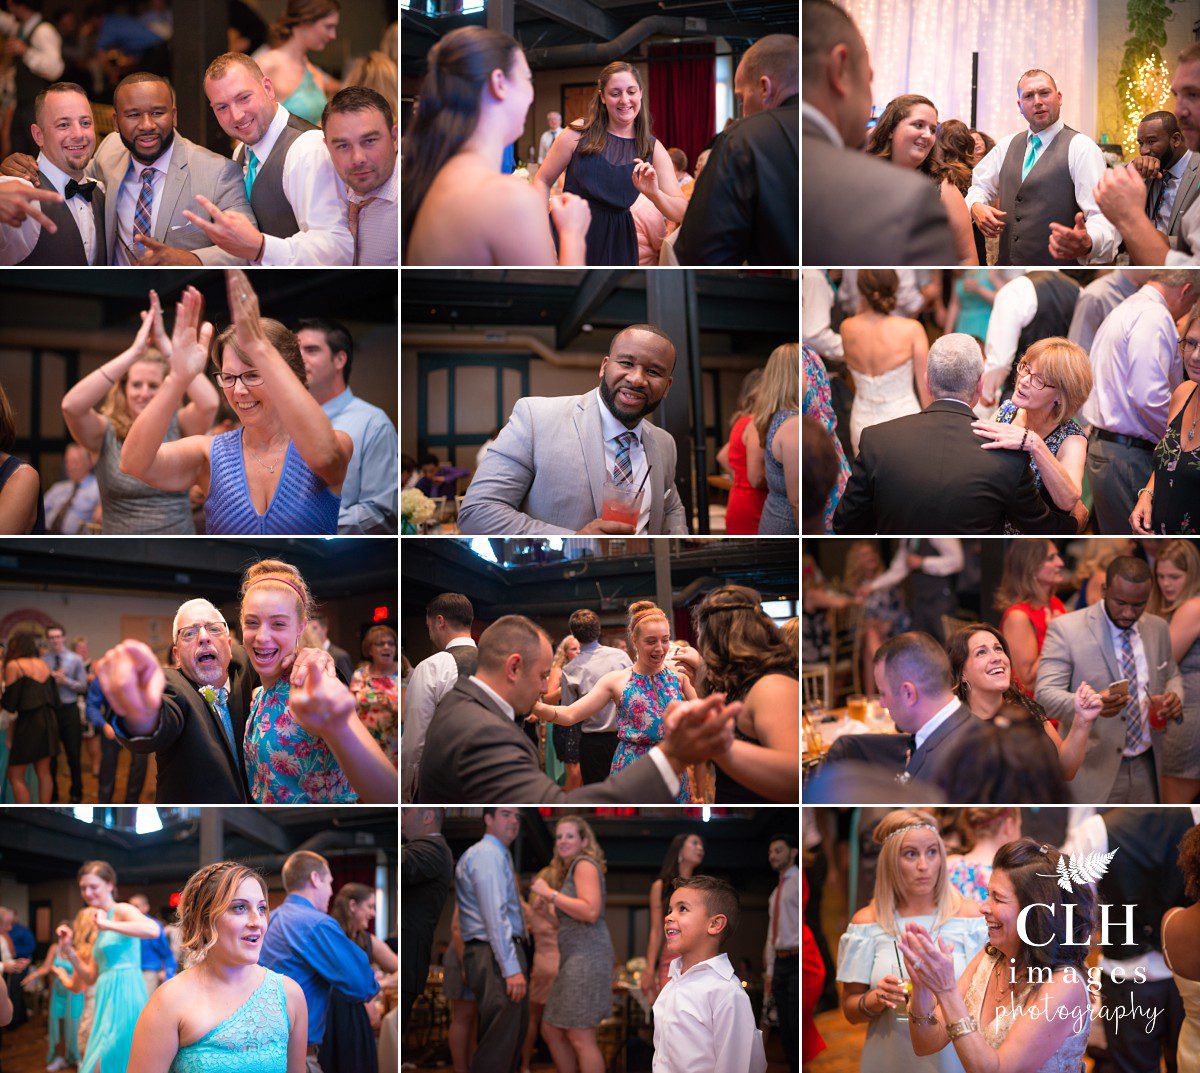 clh-images-photography-ashley-and-rob-day-wedding-revolution-hall-wedding-troy-ny-wedding-photography-178